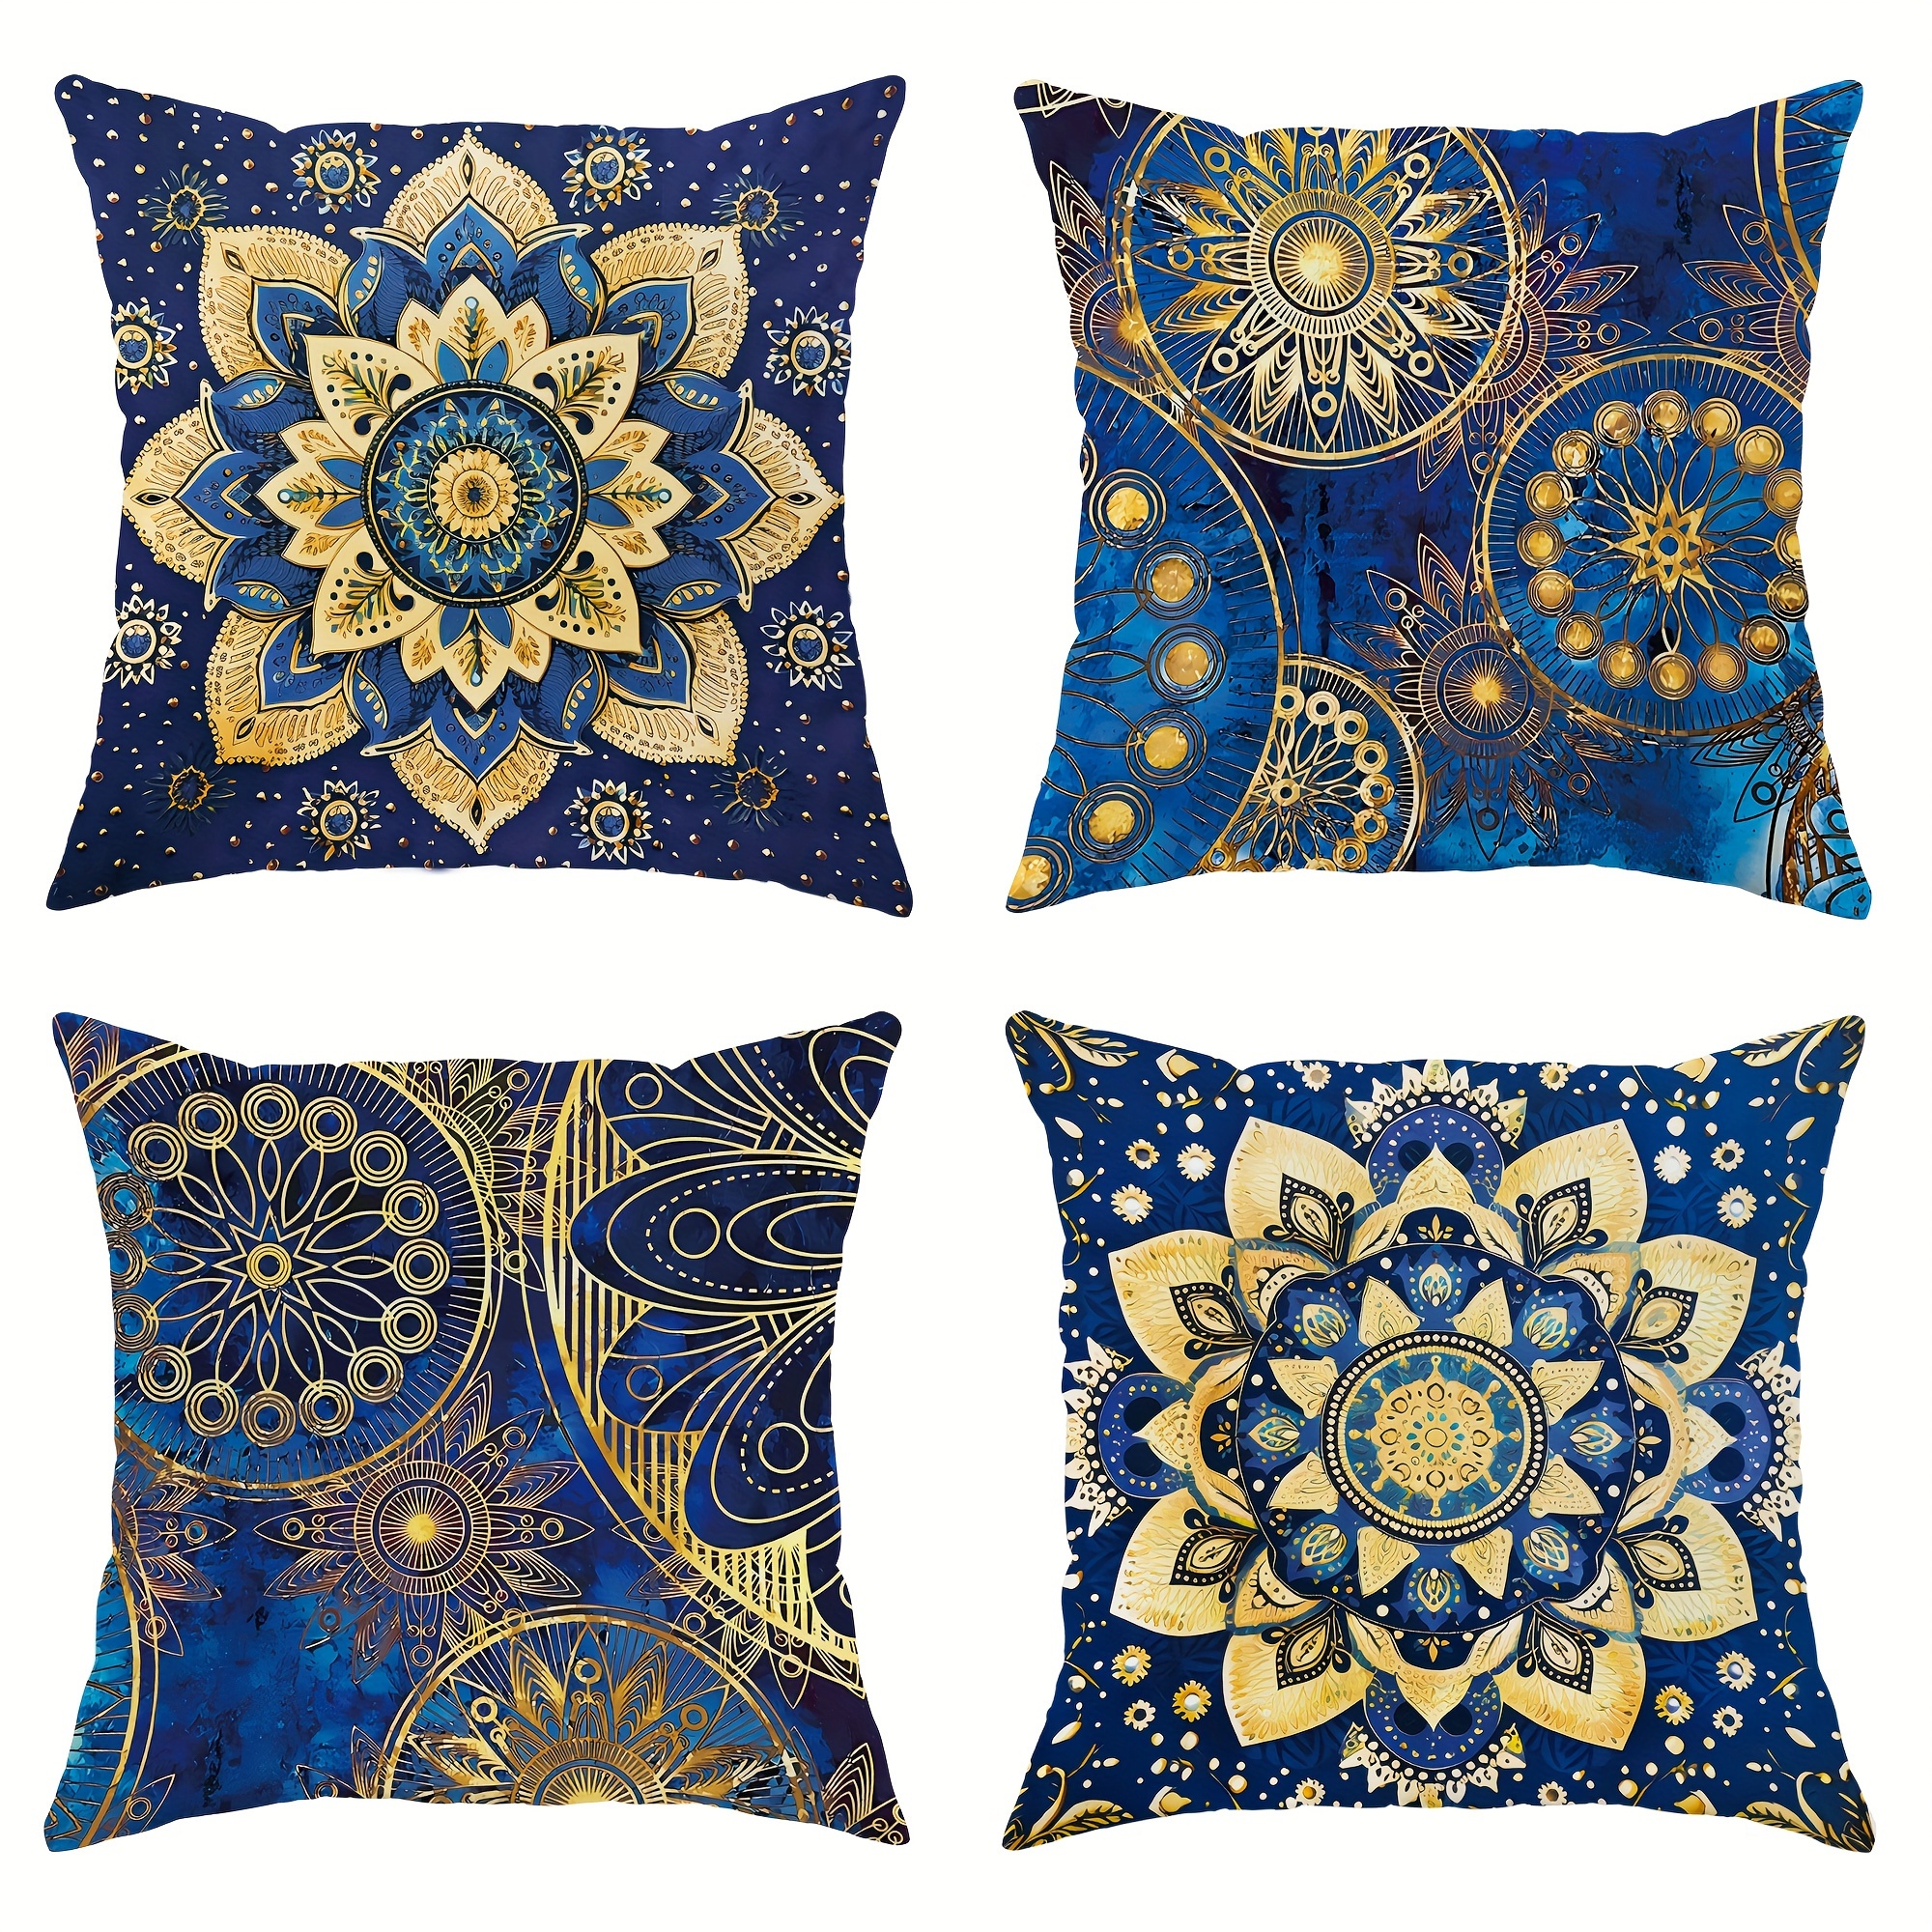 

4pcs, Mandala Floral Geometric Blue And Gold Polyester Throw Pillow Covers, Abstract Bohemian Pillow Covers, Decorative Cushion Covers 45×45cm/18 "x18", For Living Room Bedroom Sofa Bed Decoration